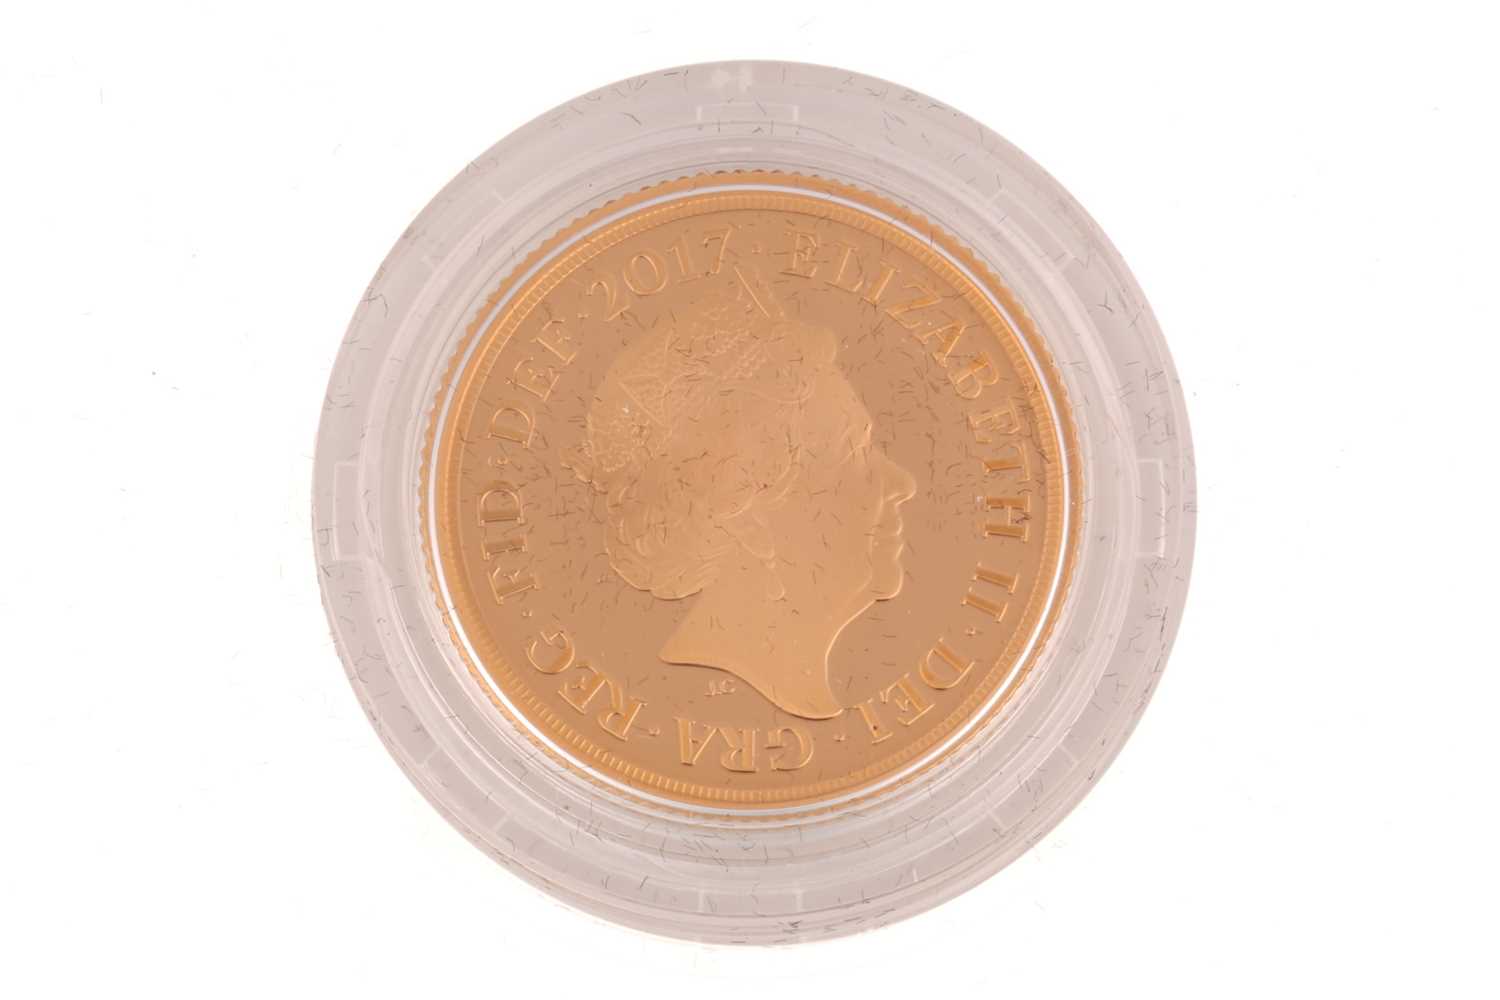 Elizabeth II gold proof The Sovereign, 2017, complete within capsule and with certificate, booklet - Image 4 of 6